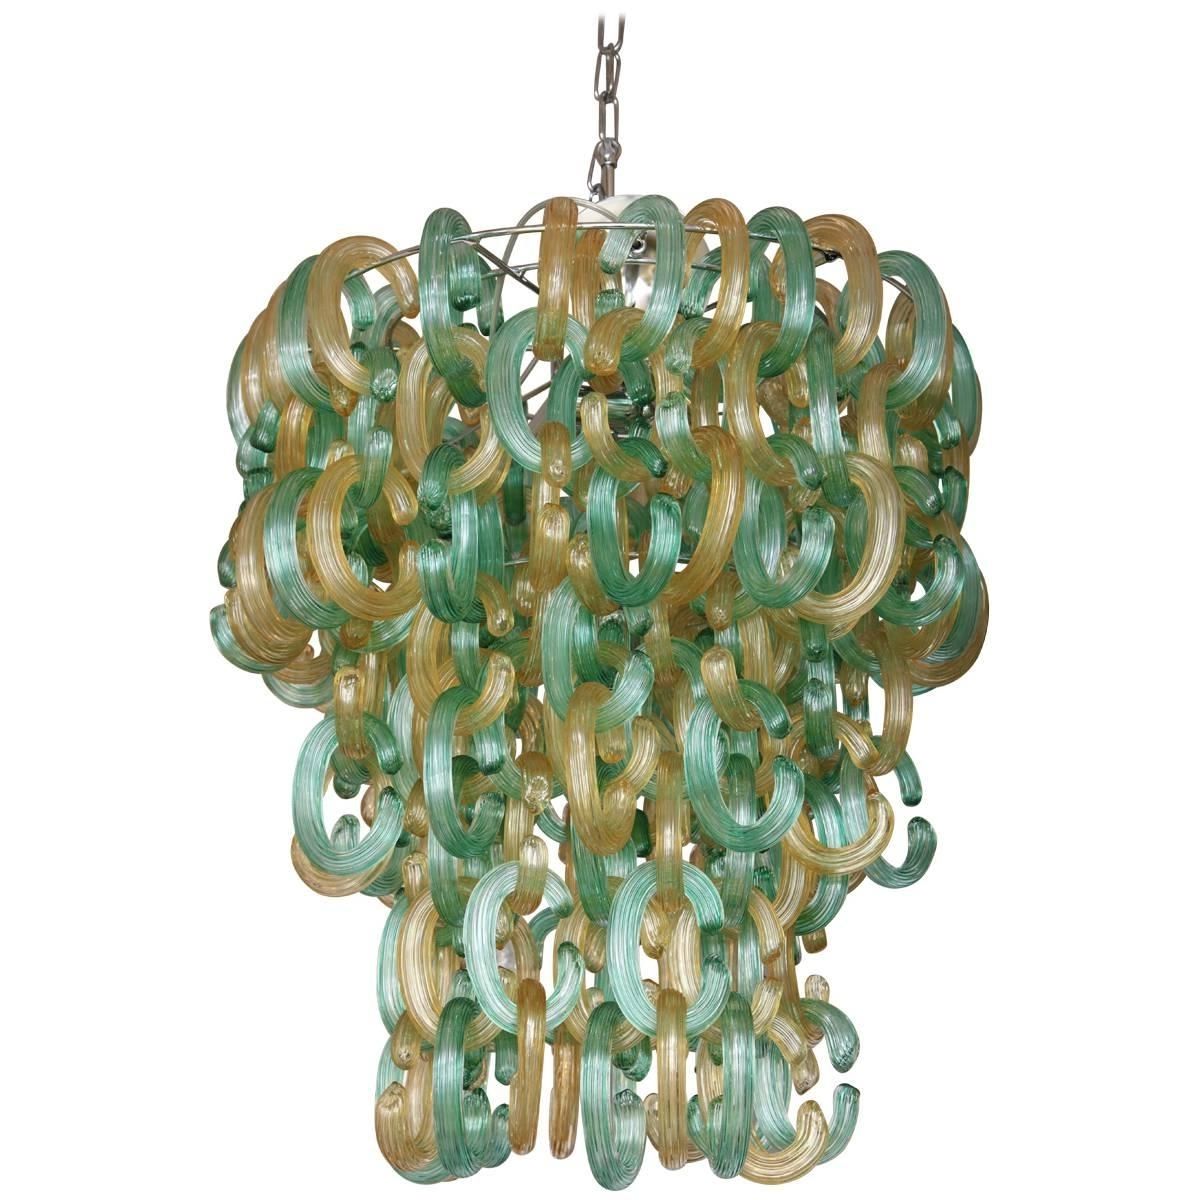 1970s Verner Panton Chrome And Glass Chandelier For Sale At 1stdibs Inside Current Turquoise Ball Chandeliers (View 15 of 20)